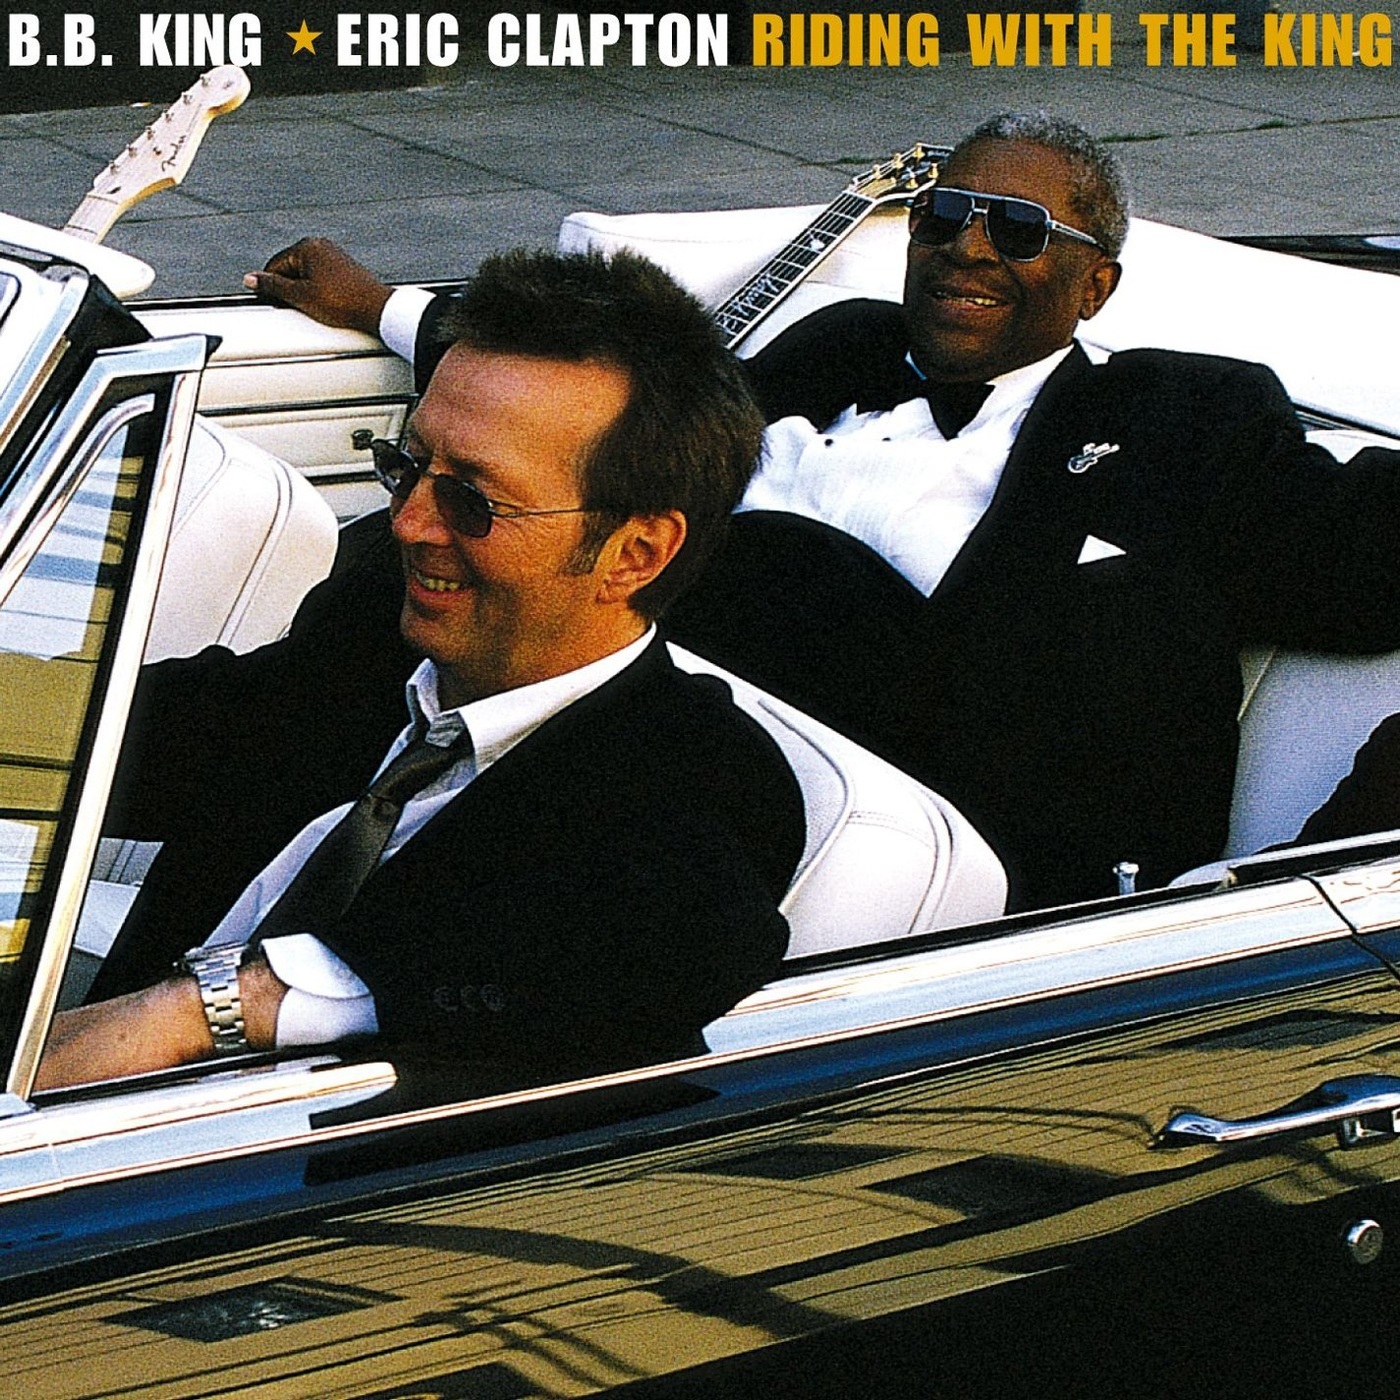 B.B. King, Eric Clapton – Riding with the King (20th Anniversary Deluxe Edition) (2000/2020) [Official Digital Download 24bit/96kHz]